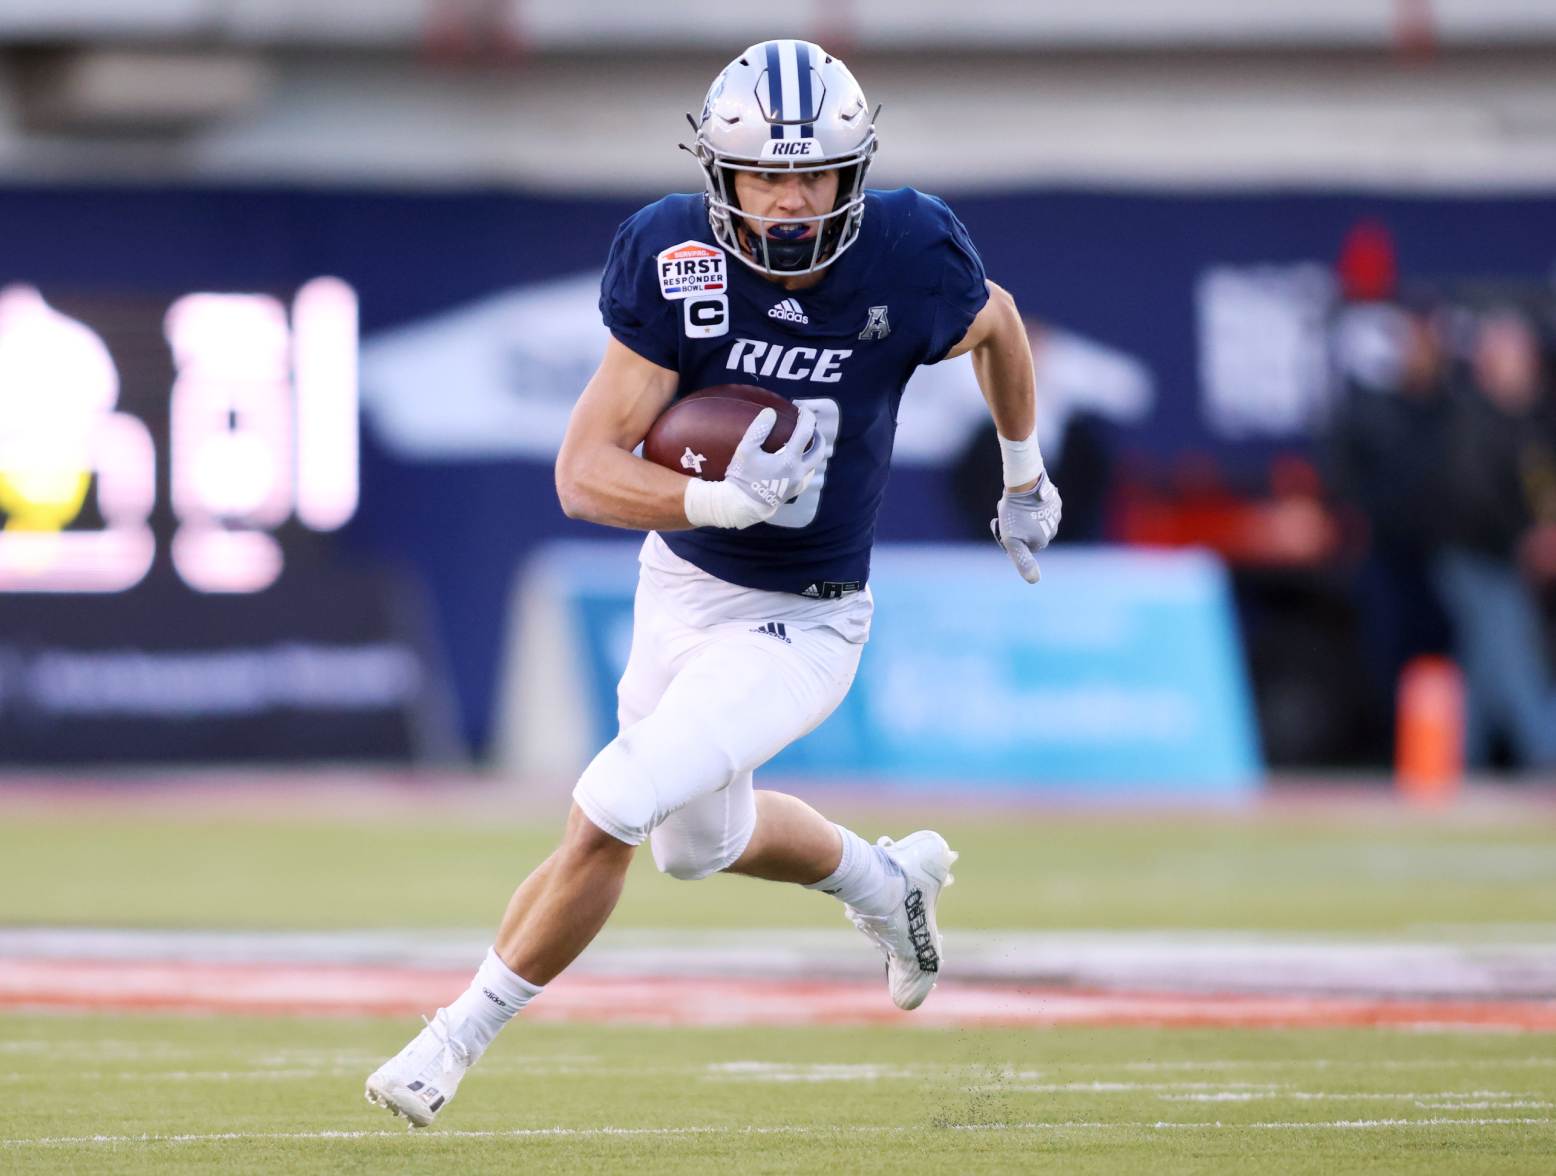 Dec 26, 2023; Dallas, TX, USA; Rice Owls wide receiver Luke McCaffrey (10) runs with the ball against the Texas State Bobcats in the first quarter at Gerald J Ford Stadium. Credit: Tim Heitman-USA TODAY Sports